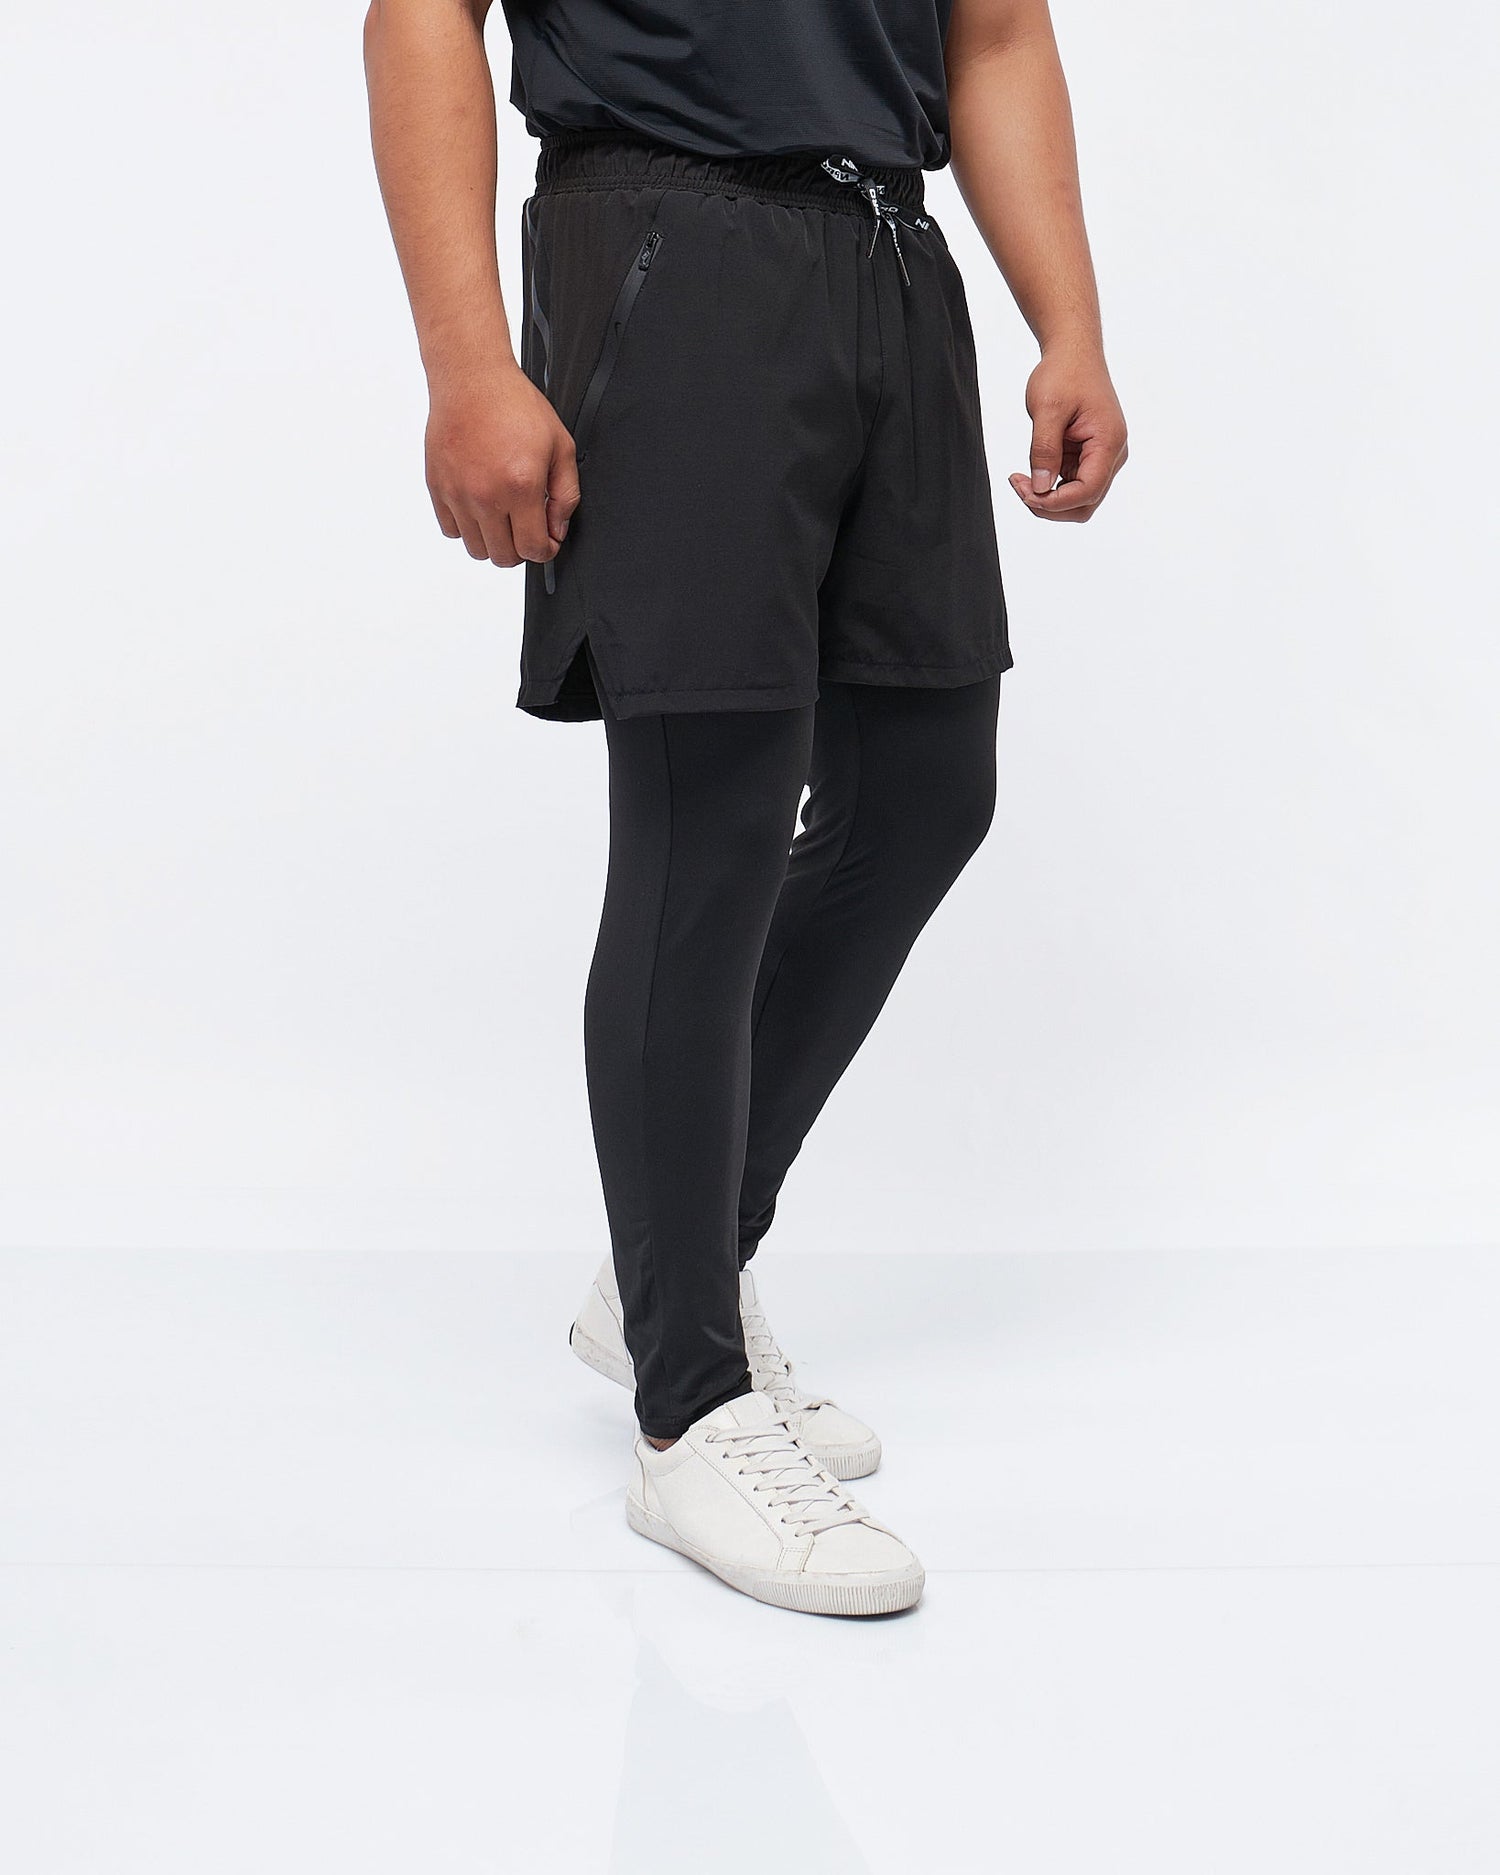 MOI OUTFIT-Lightweight Gym Training 2 in 1 Men Leggings 15.50